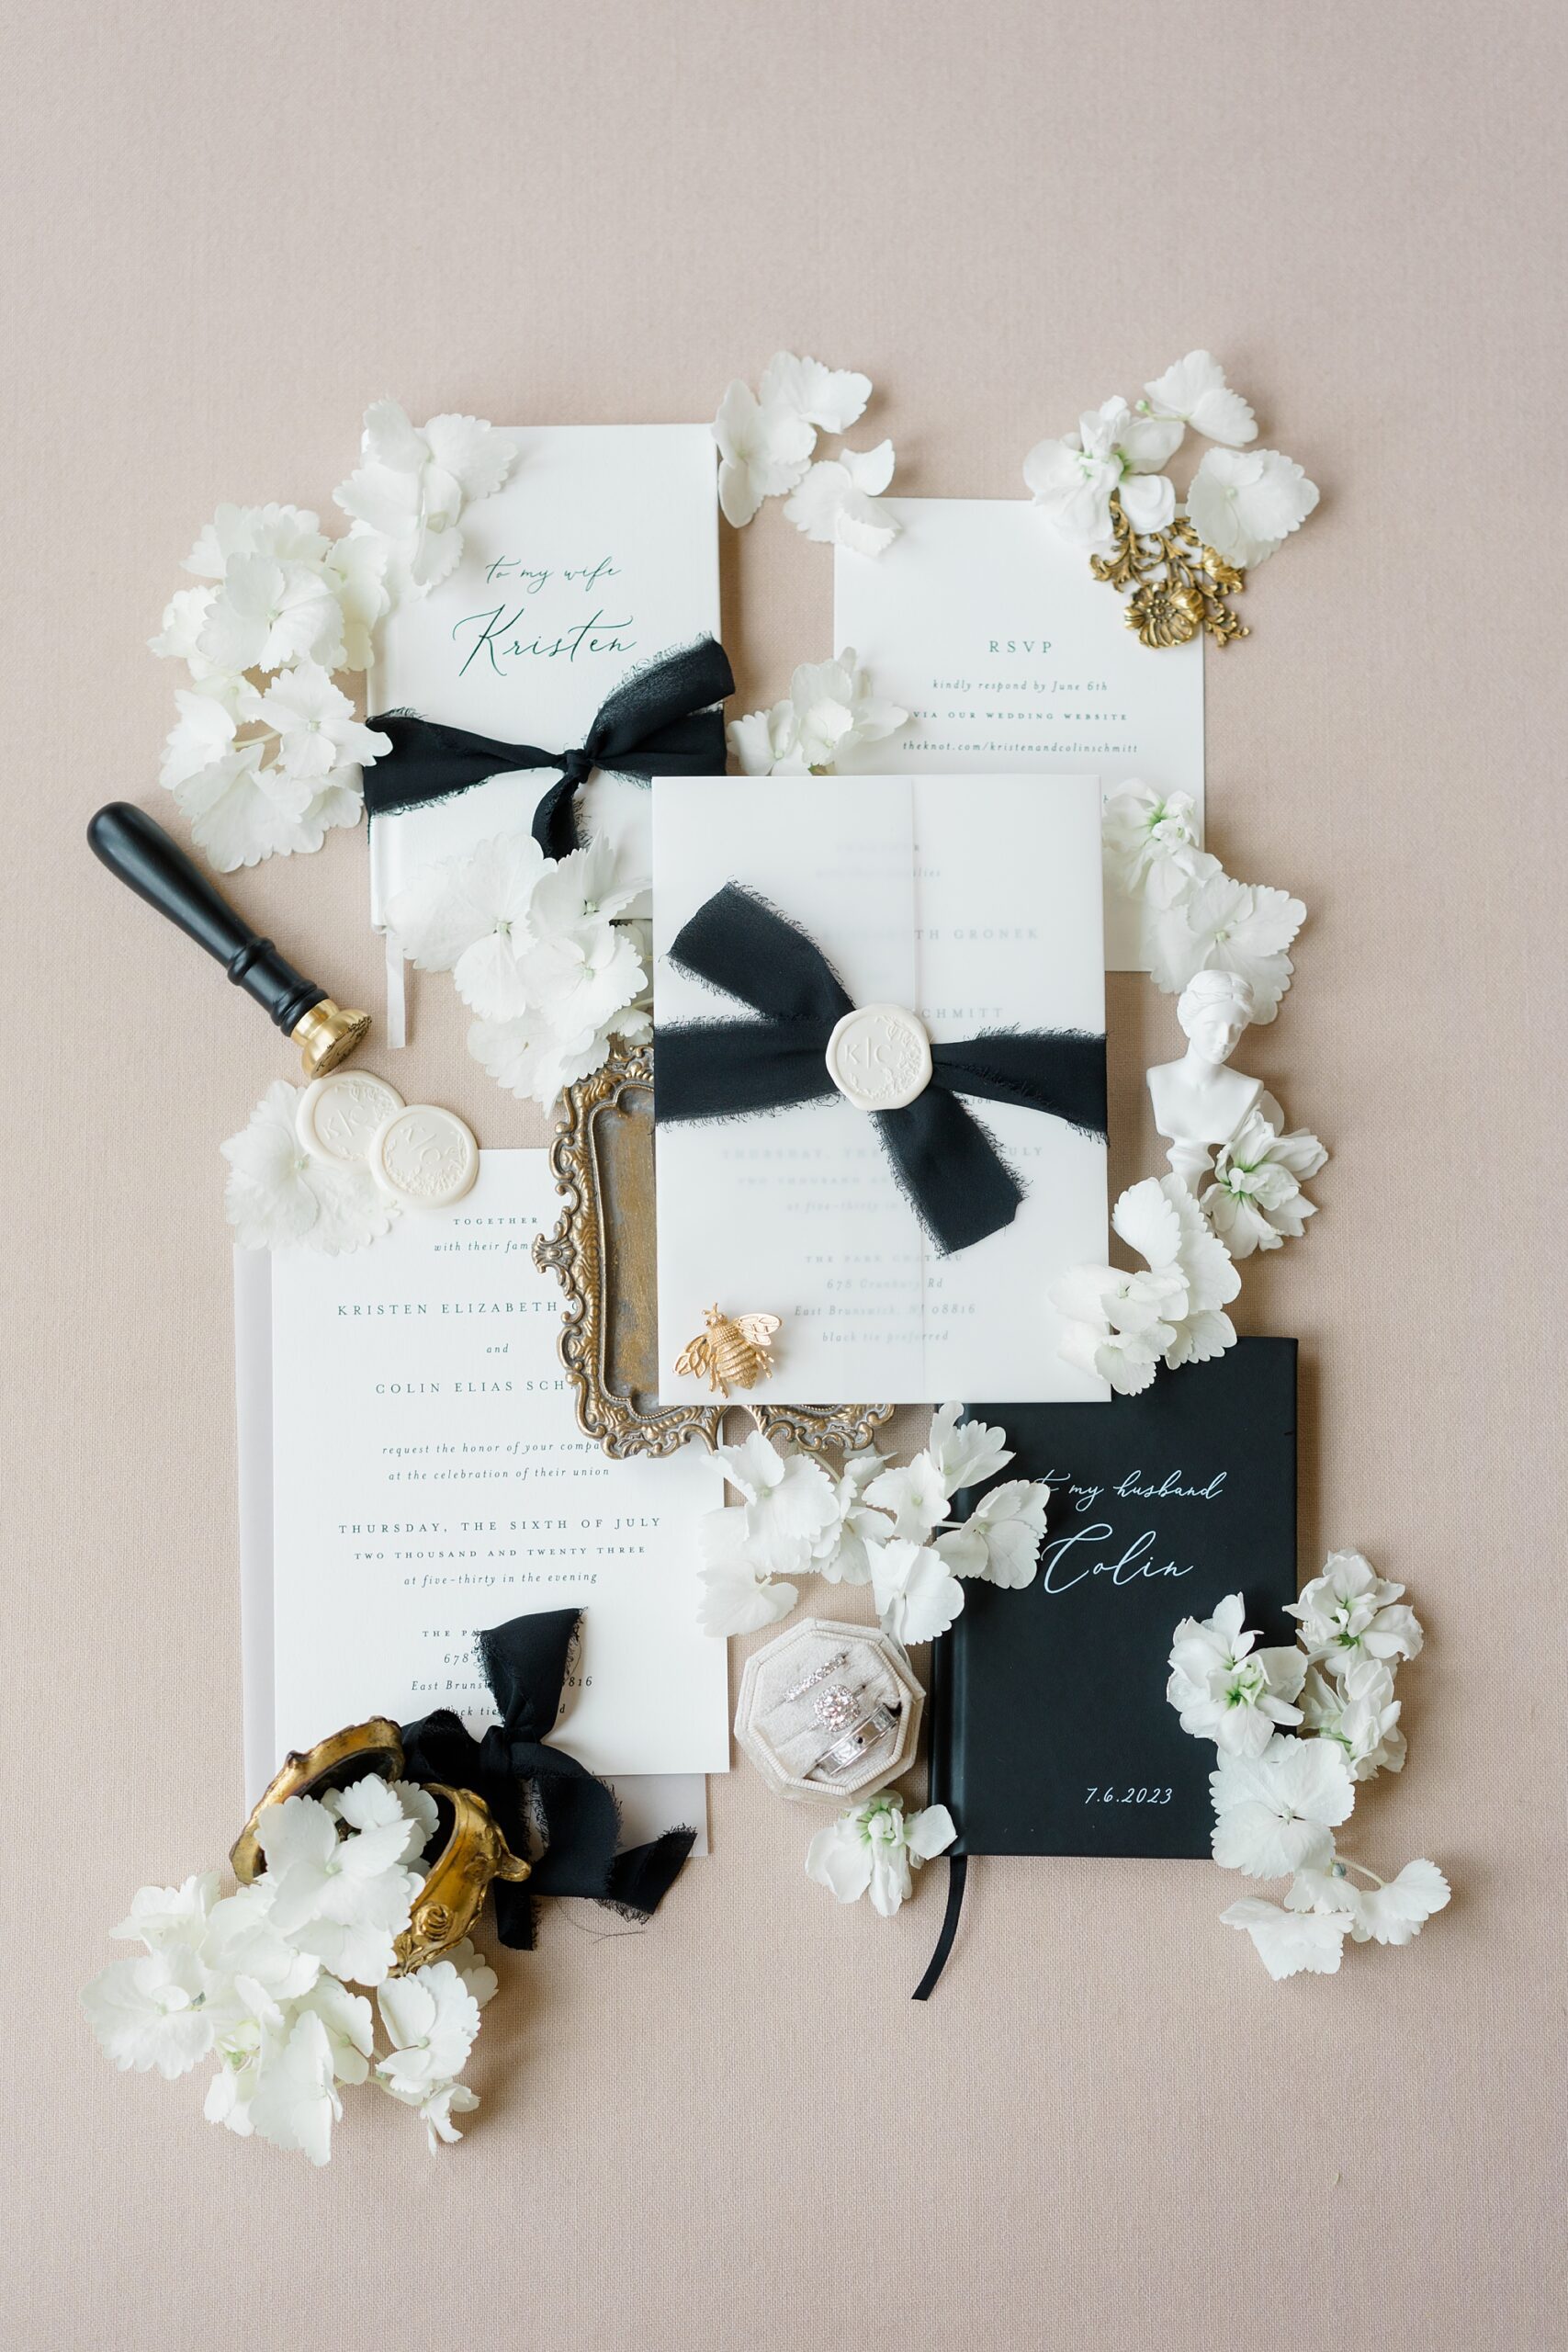 chic invitation suite in black and white from Timeless Park Chateau Wedding